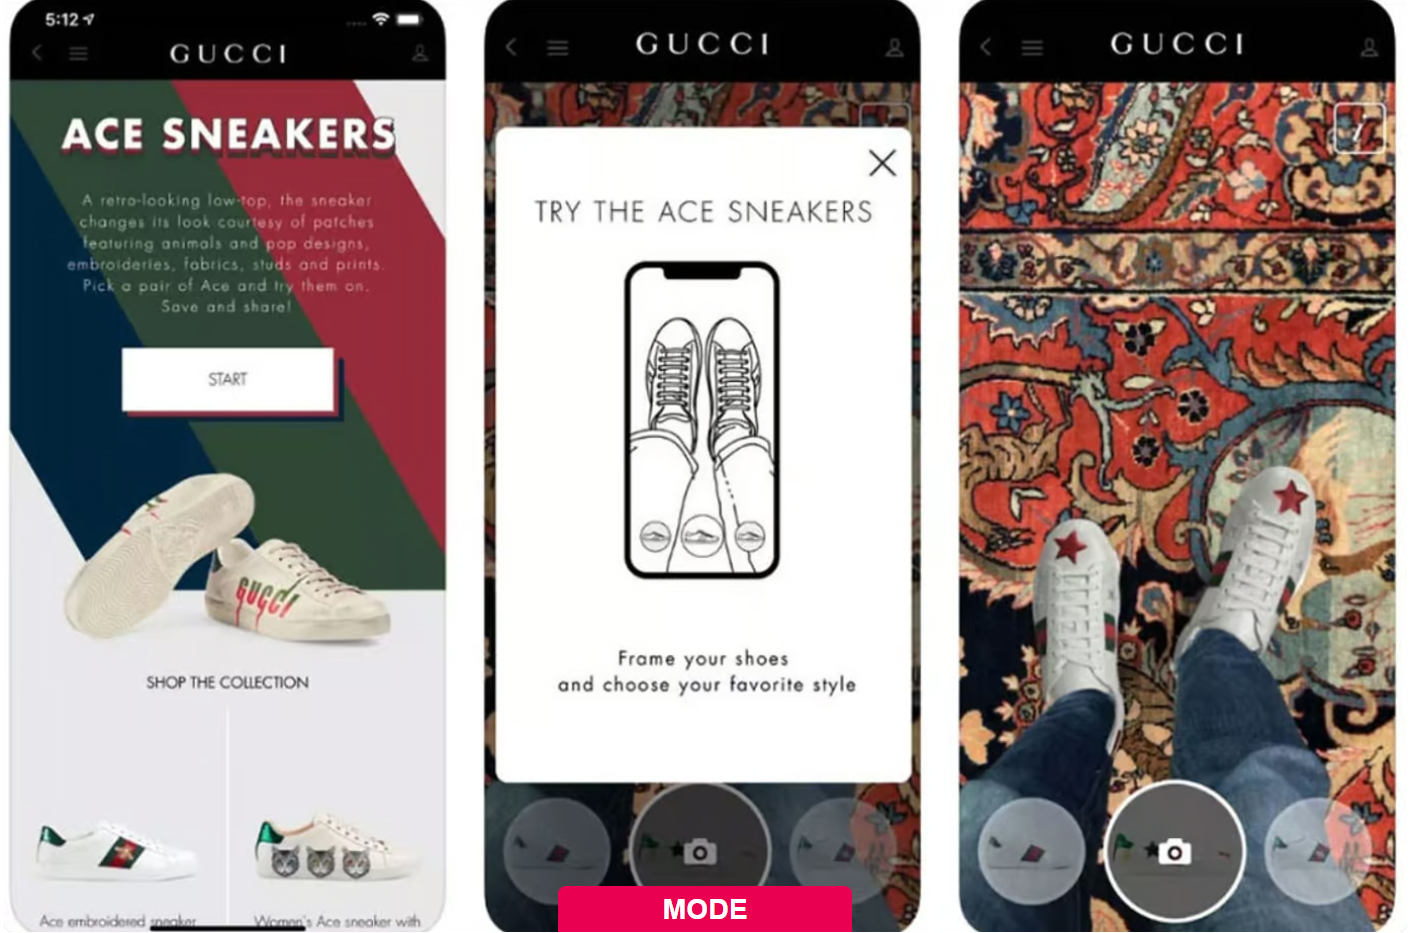 Gucci and its application allowing consumers to use augmented reality for its sneakers